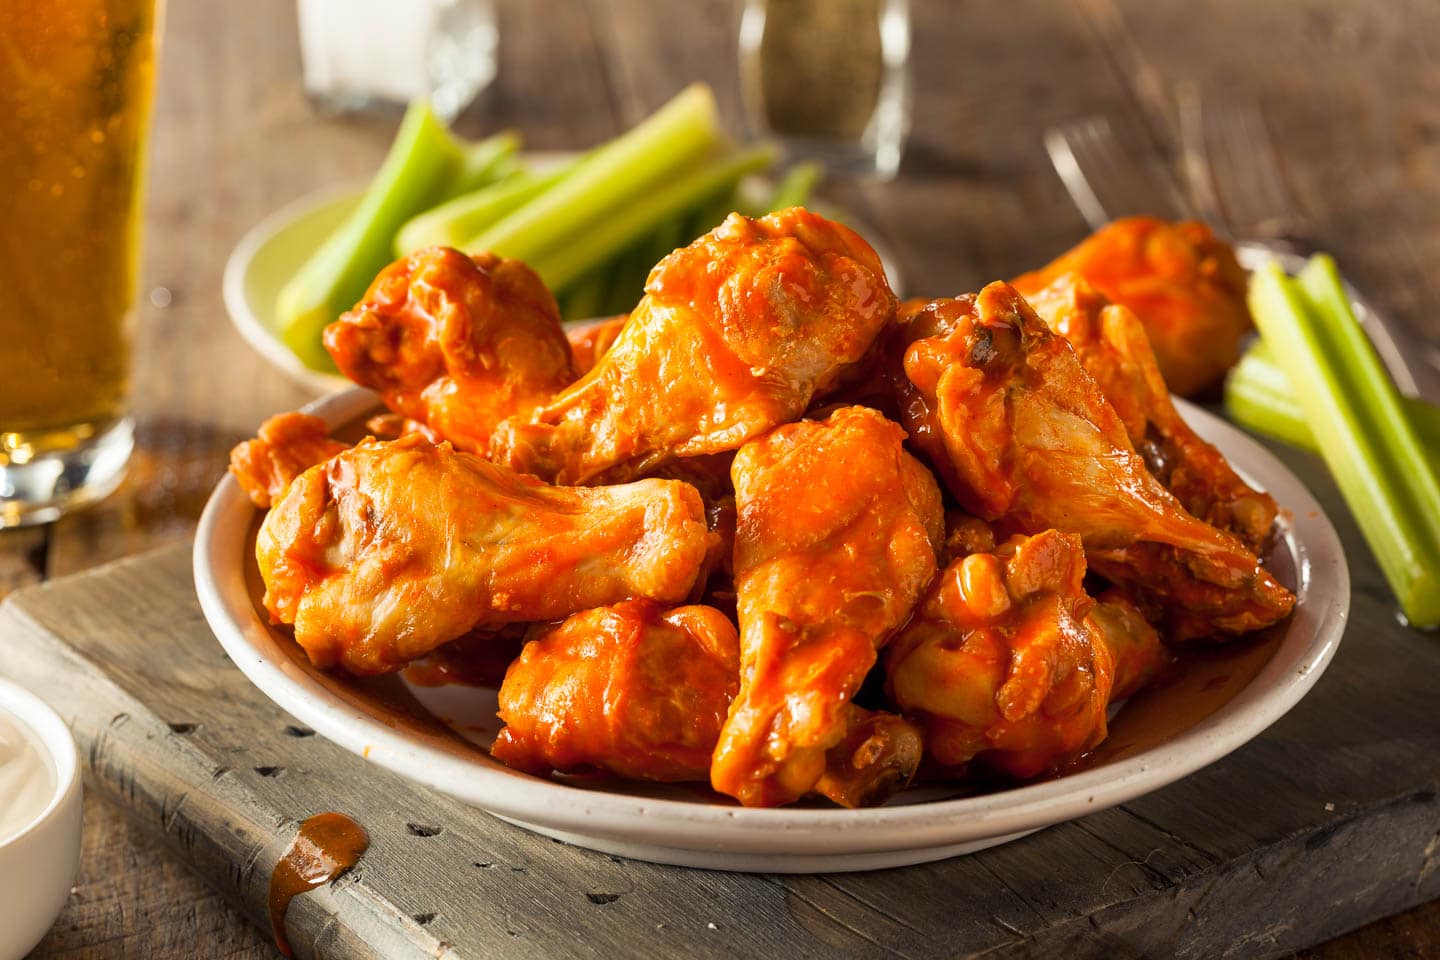 baked buffalo chicken wings on a plate with celery in the background